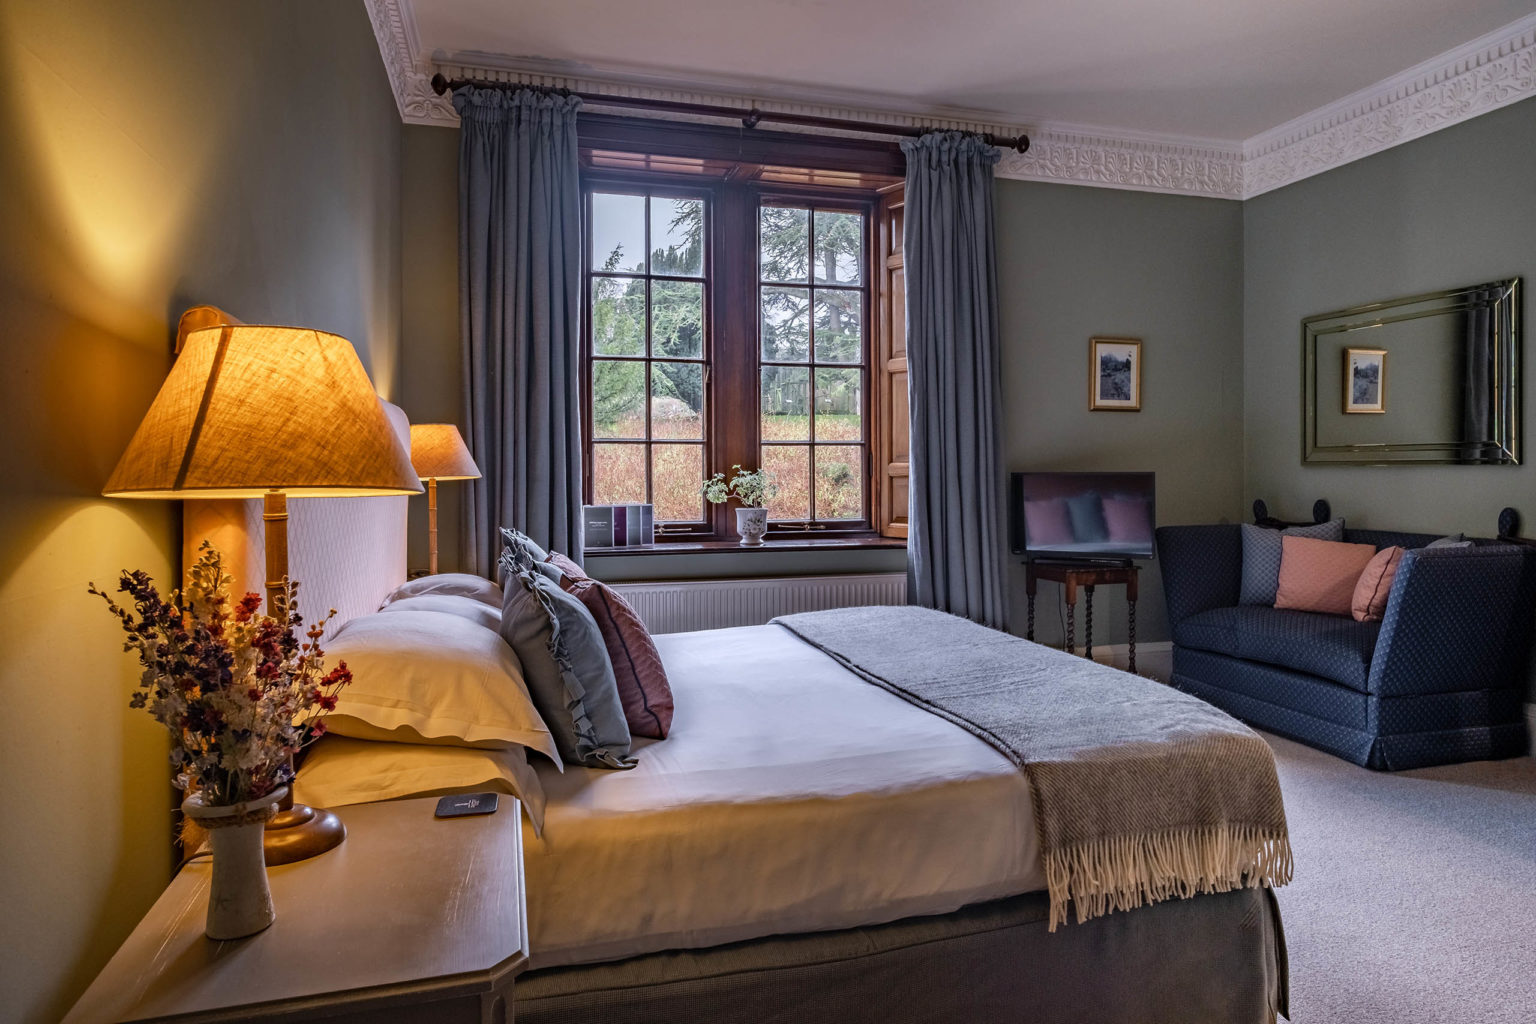 The Harlow Carr bedroom at Swinton Park Hotel in North Yorkshire